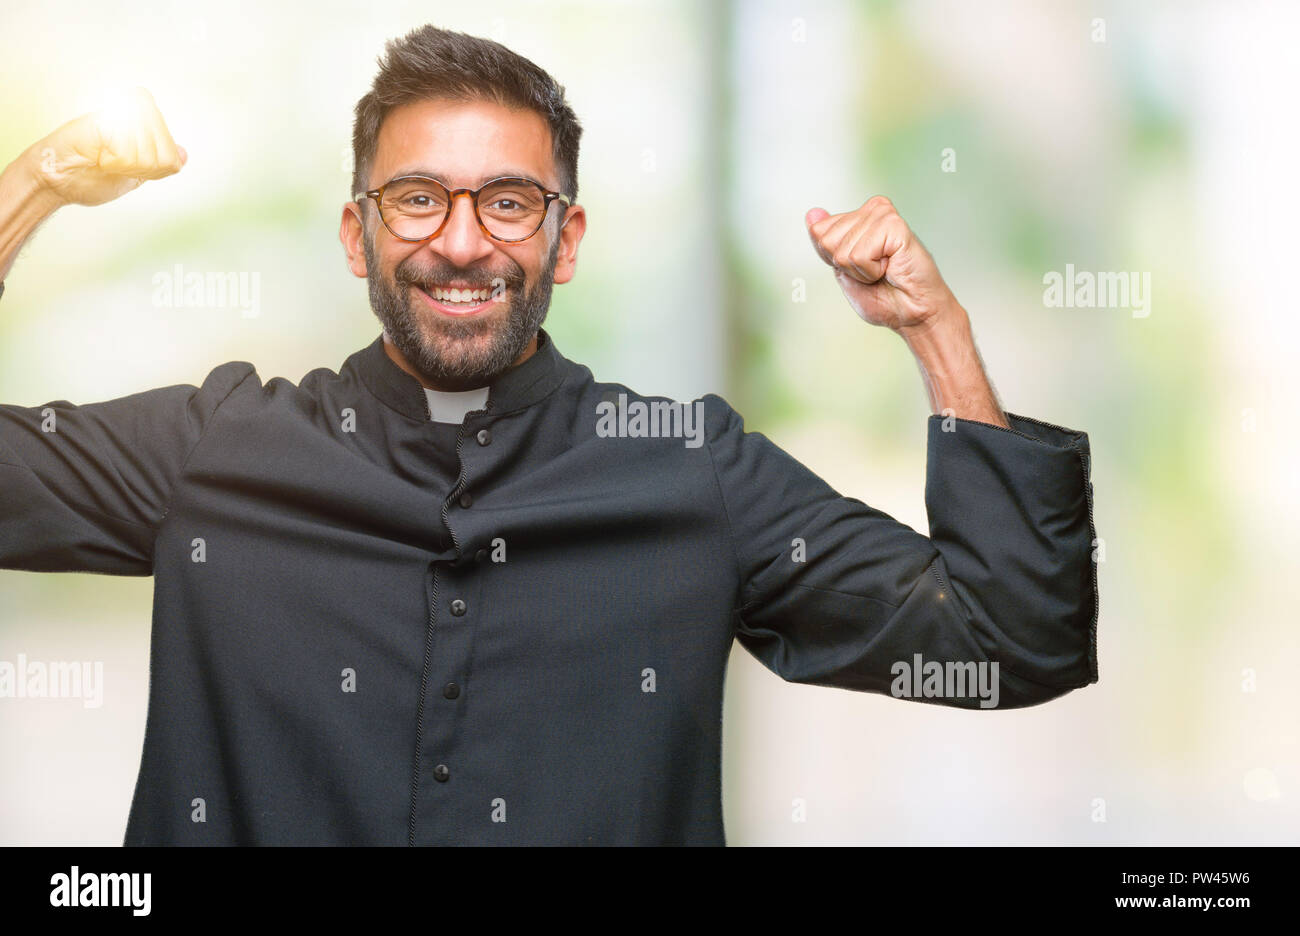 Adult hispanic catholic priest man over isolated background showing arms muscles smiling proud. Fitness concept. Stock Photo